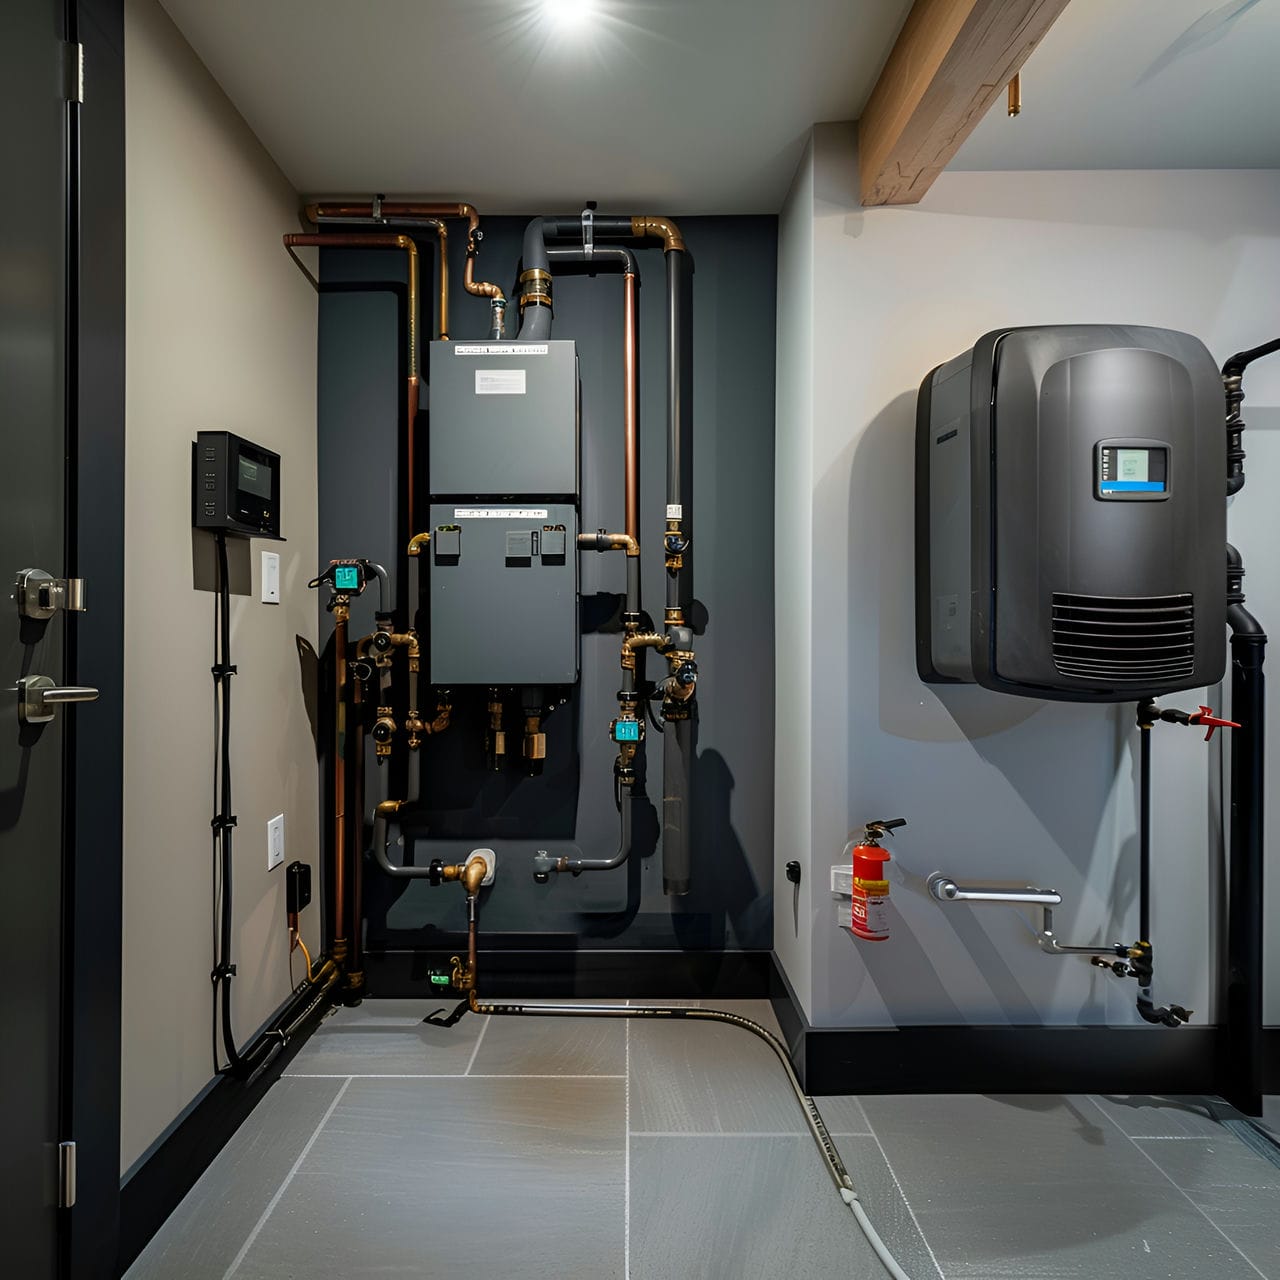 Boiler room: size, functionality, uses, furniture, and renovation